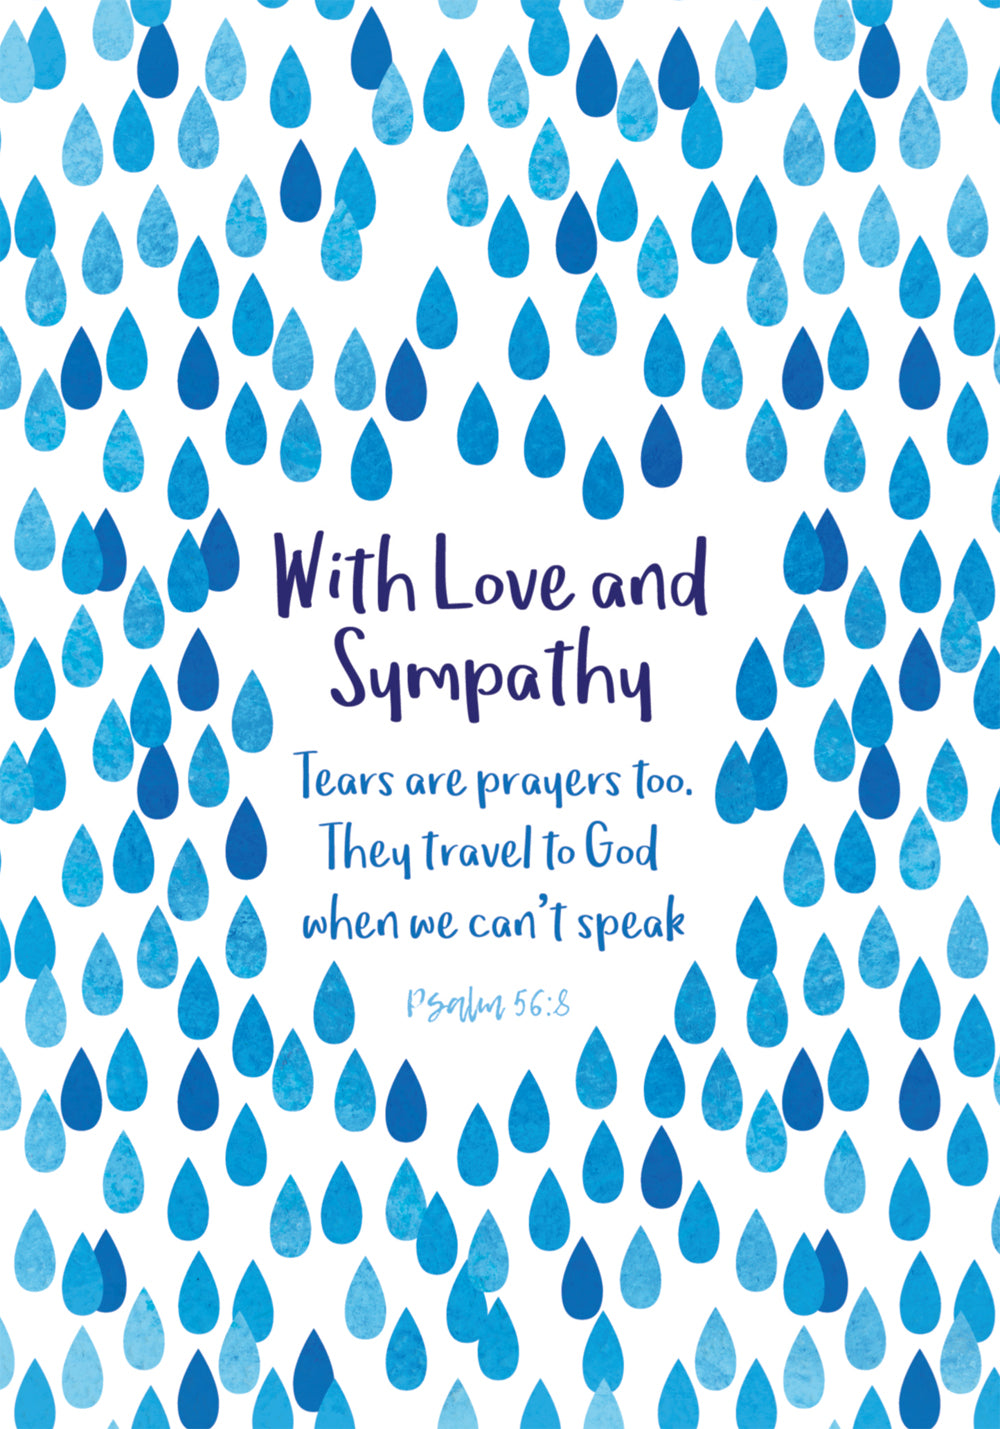 With Love & Sympathy - Std Card Waterboard (6 Pack)With Love & Sympathy - Std Card Waterboard (6 Pack)